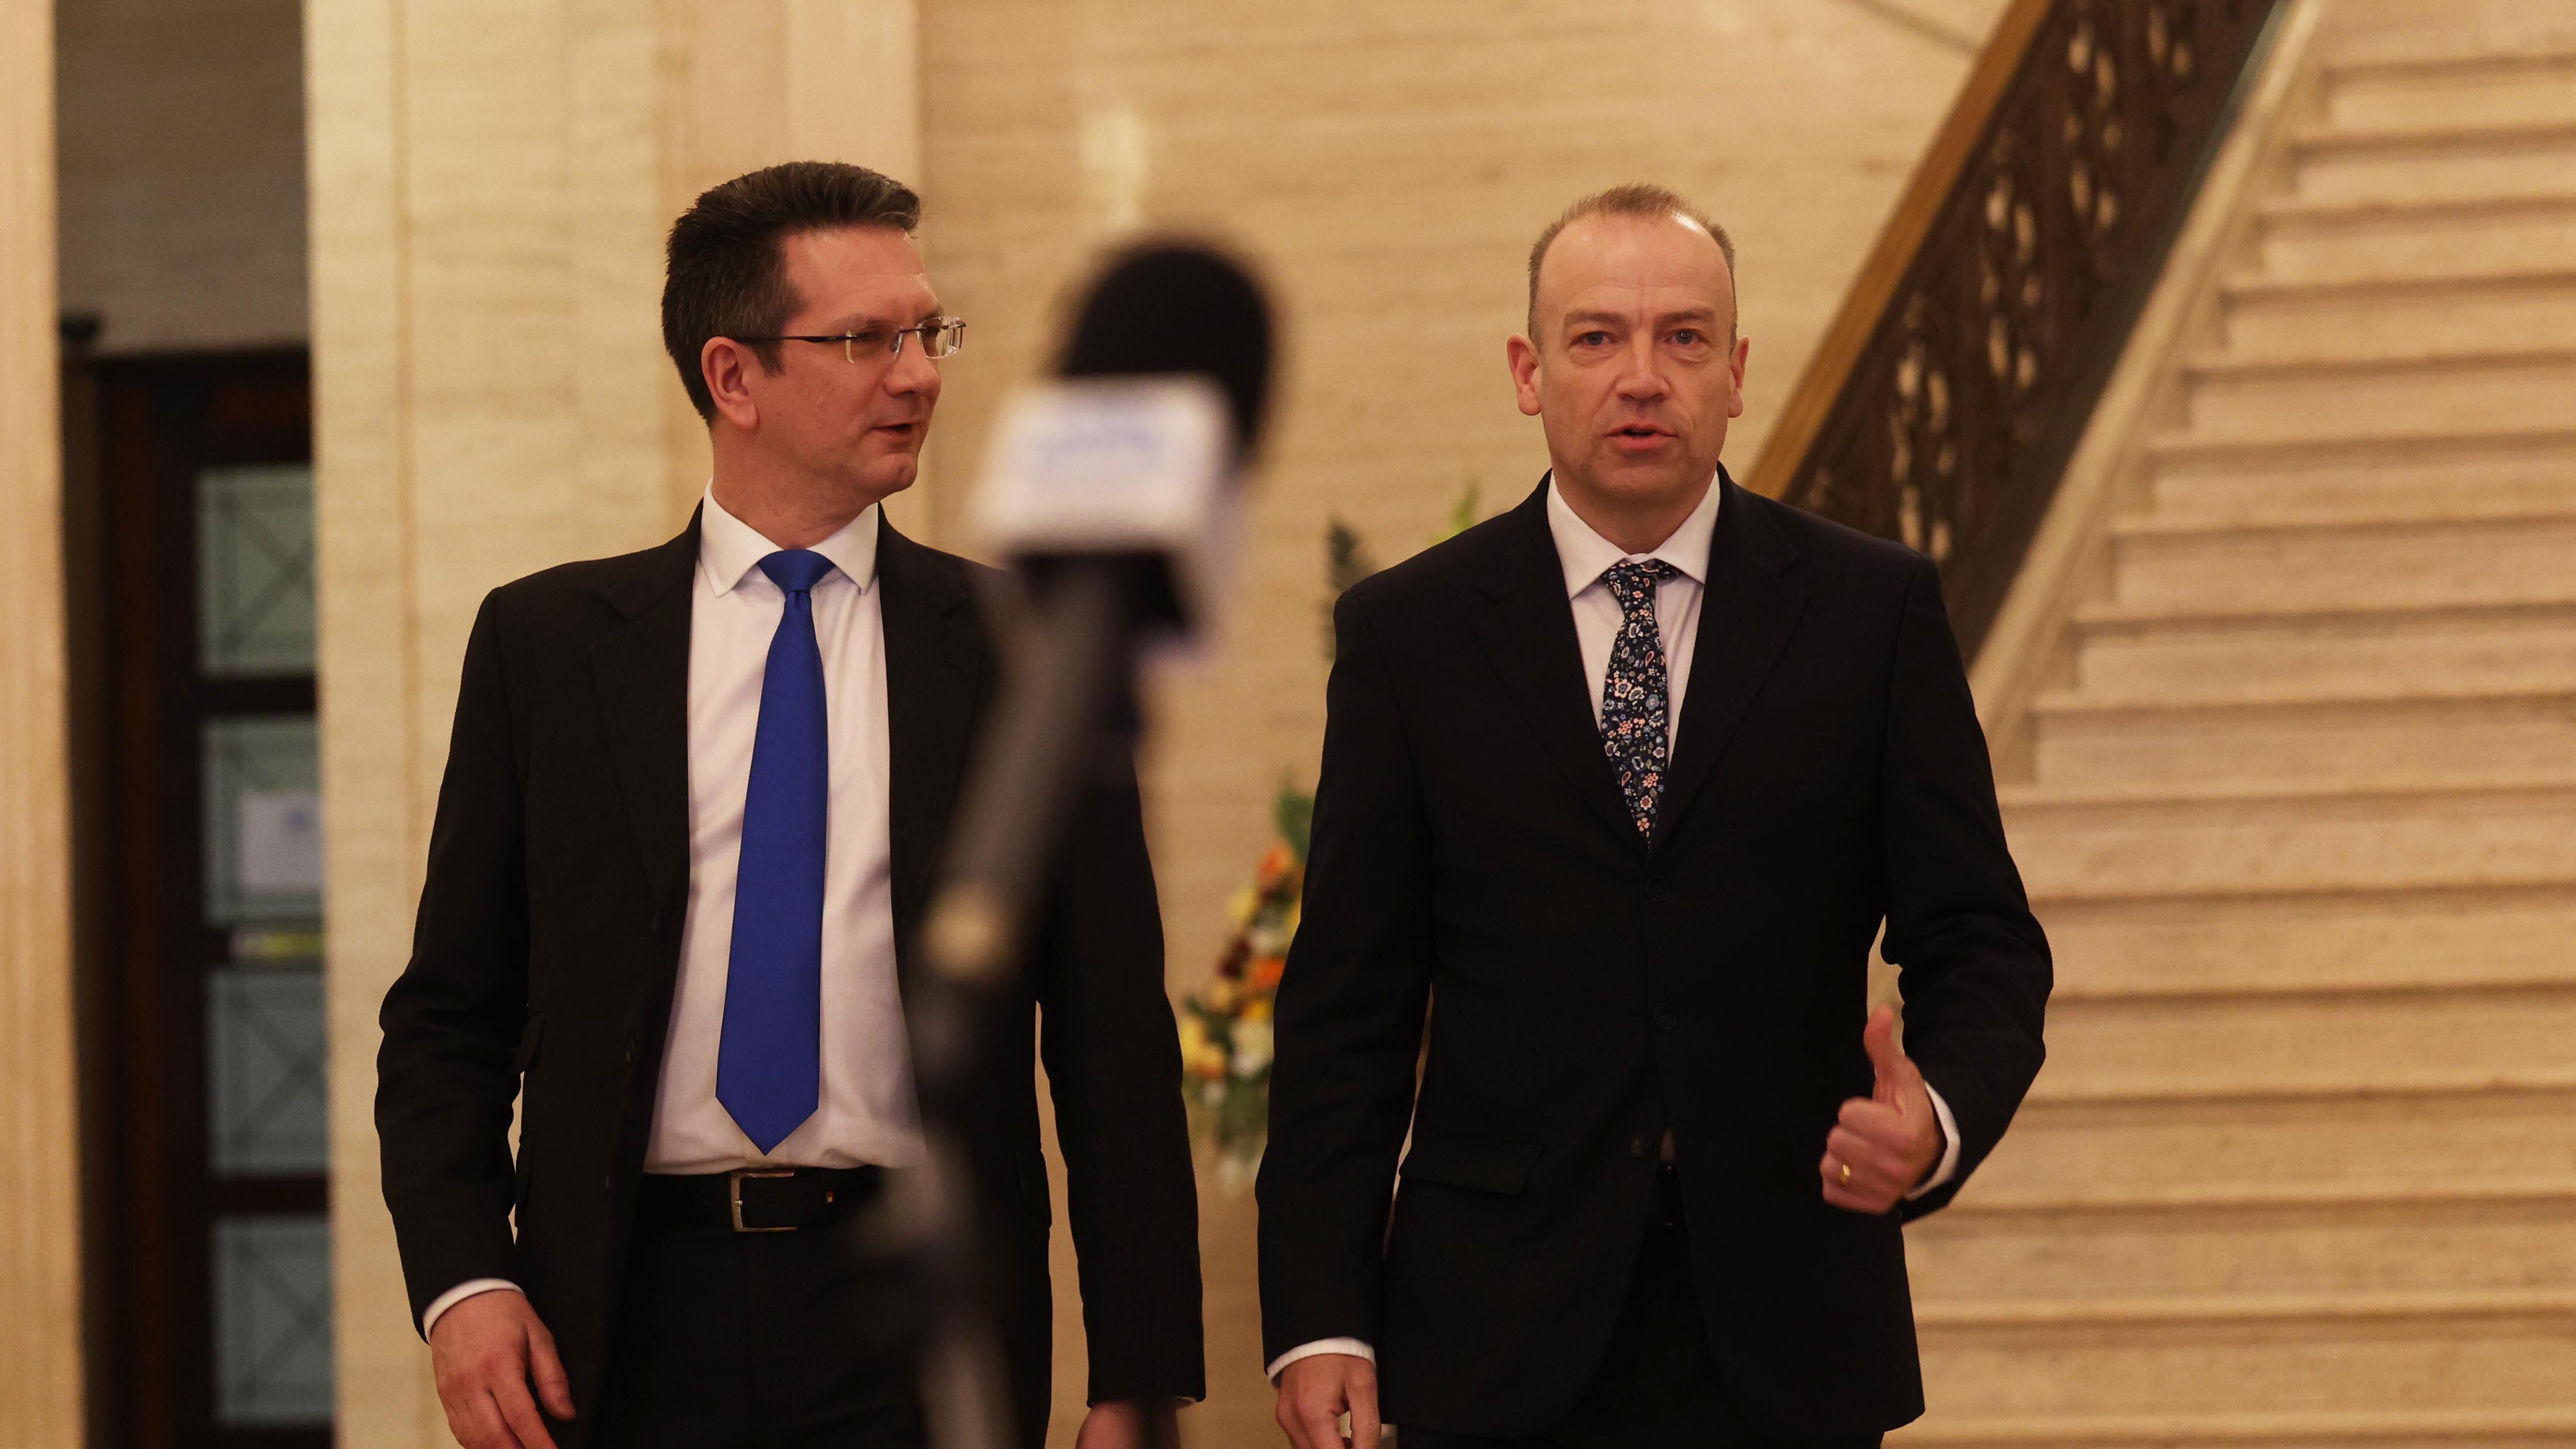 Chris Heaton-Harris (right) and Steve Baker (left)  speak to the media as Northern Ireland's devolved government is restored, Two years to the day since it collapsed. PICTURE:  COLM LENAGHAN